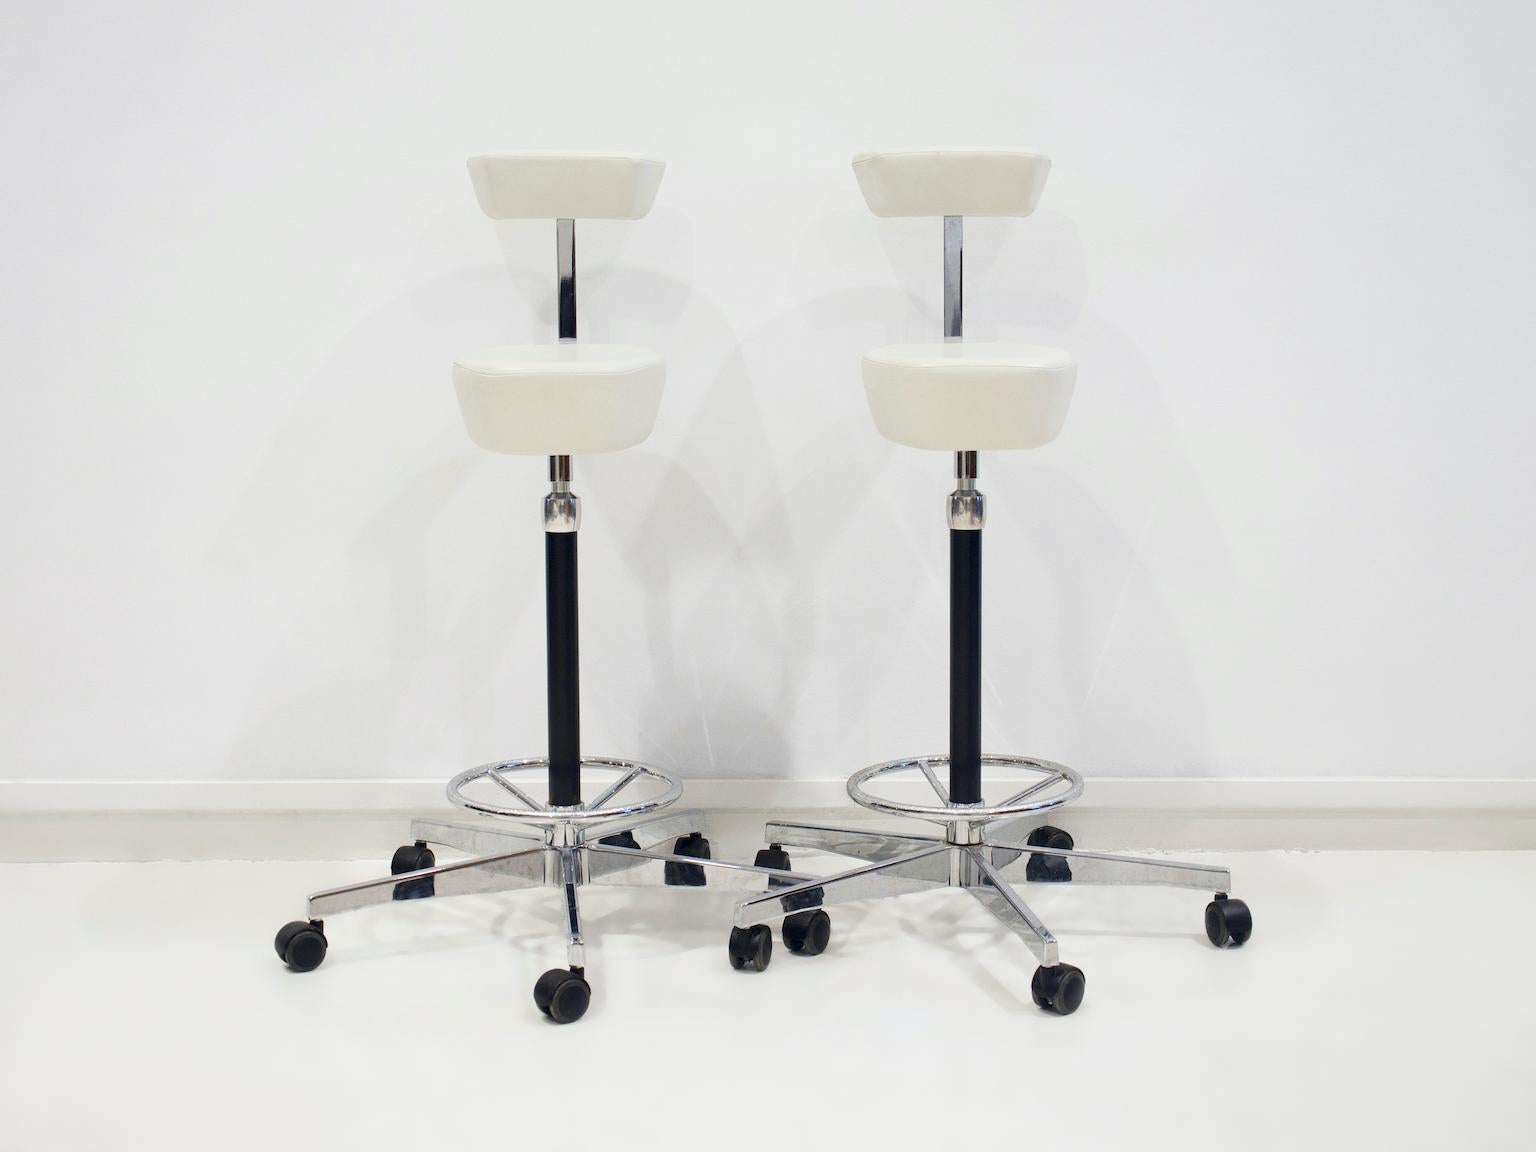 Pair of white leather stools or 'Perch Chairs' by George Nelson for Vitra. Designed 1964. This pair is manufactured in 2010 by Vitra. Some signs of use - marks, scratches.